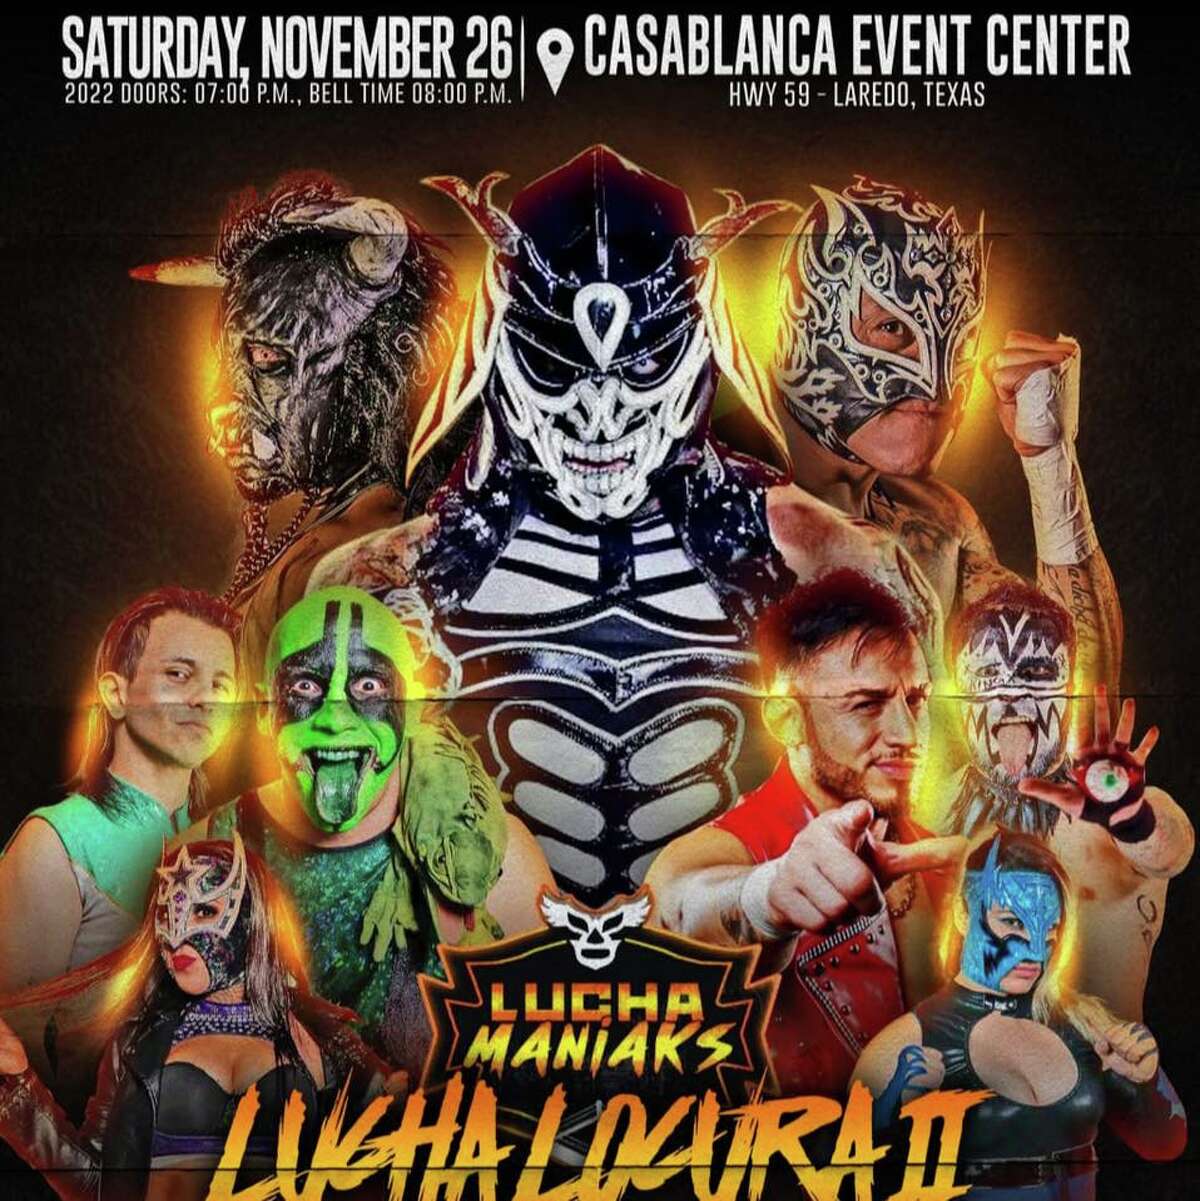 Lucha Journal 4 Lucha Bros Live. I have wanted to see the Lucha